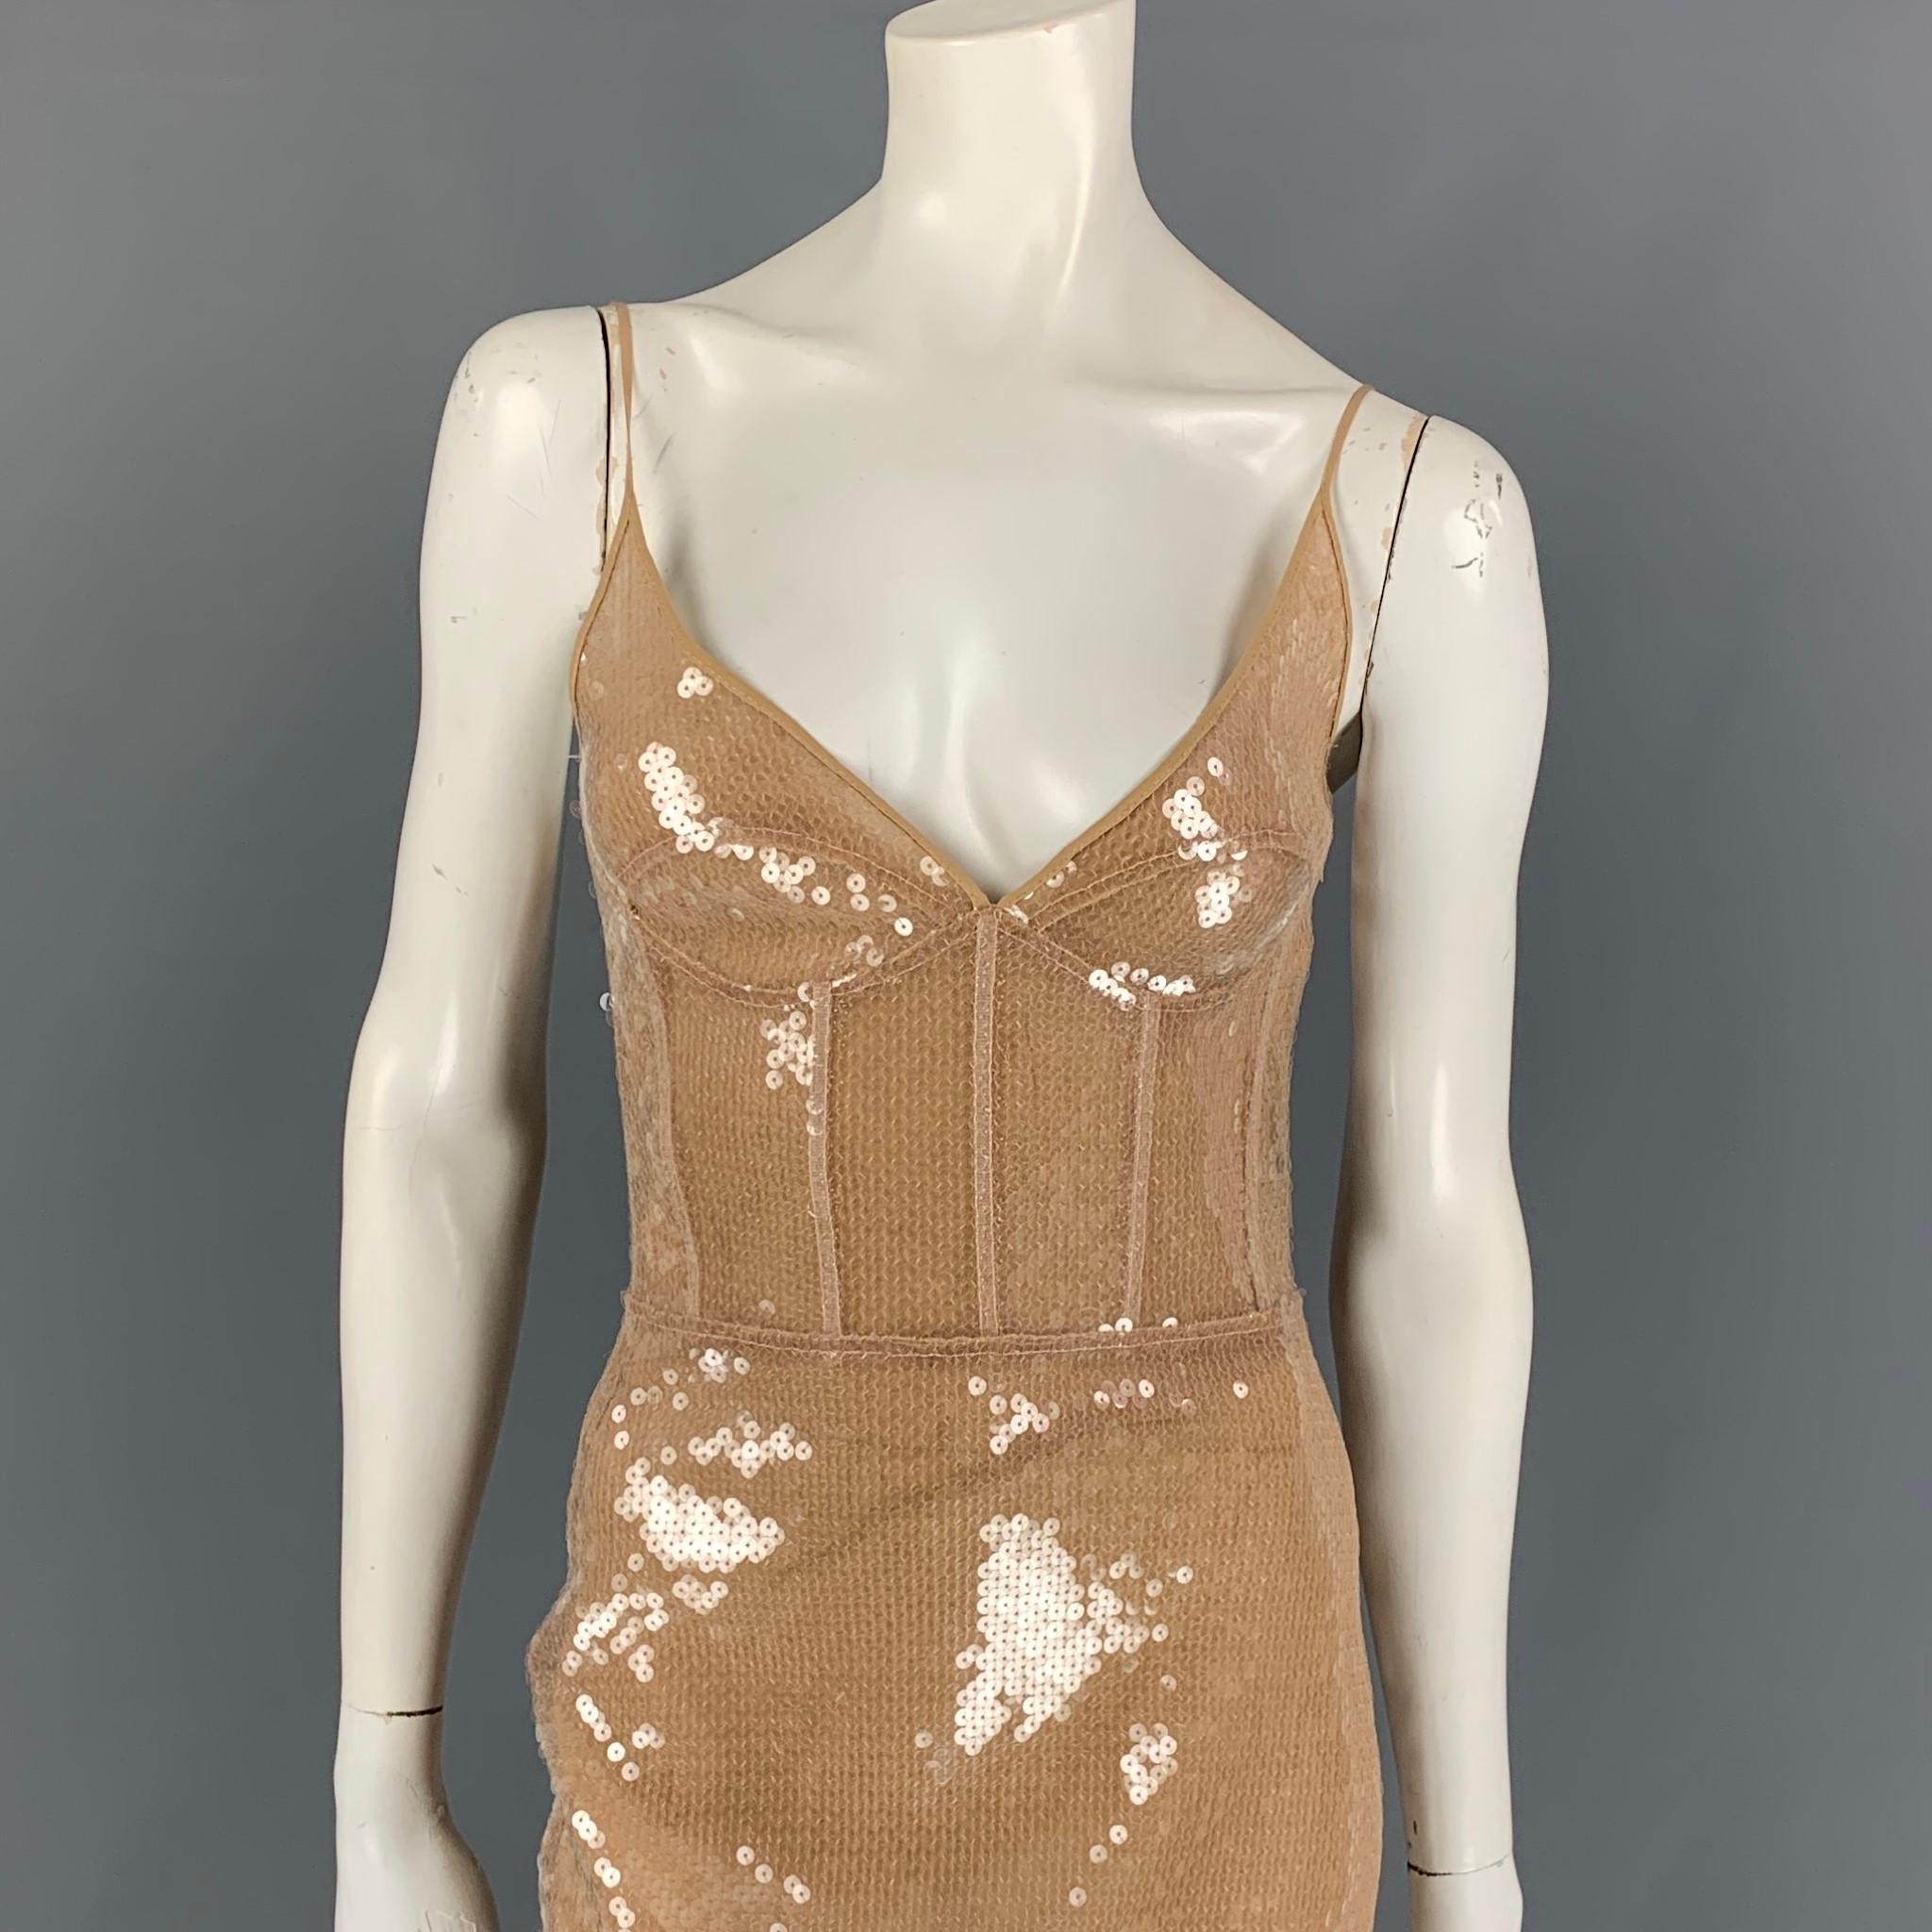 DAVID KOMA cocktail dress comes in a beige sequined silk with a slip liner featuring a bustier top, midi skirt, back slit, spaghetti straps, and a back zip up closure. 

Very Good Pre-Owned Condition.
Marked: 8
Original Retail Price: